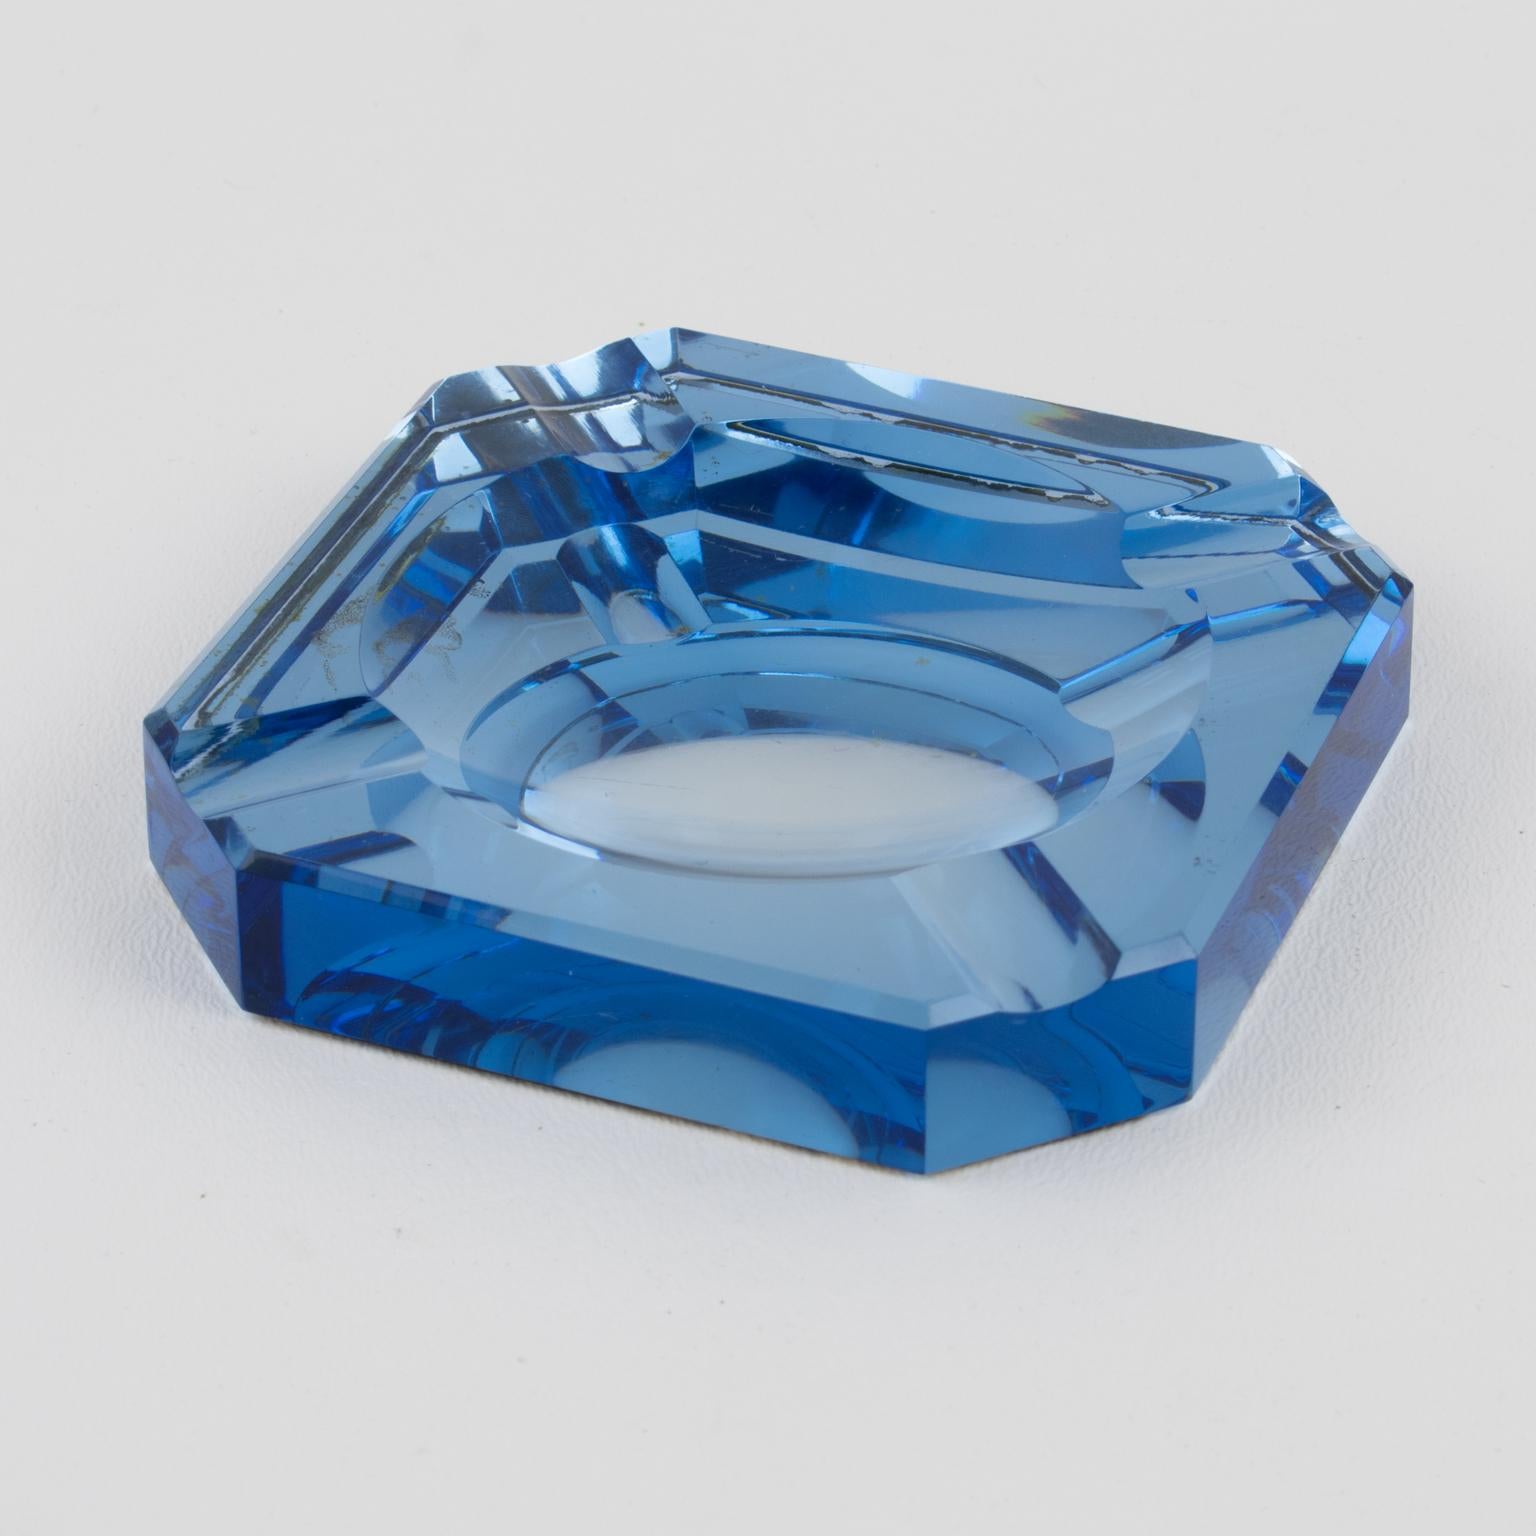 French designer Jean Luce (1895 - 1964) created this stunning Art Deco mirrored ashtray, desk tidy, or catchall in the 1930s. The vide-poche features a square shape with a thick blue mirrored glass slab and bevelling all around. There is no visible